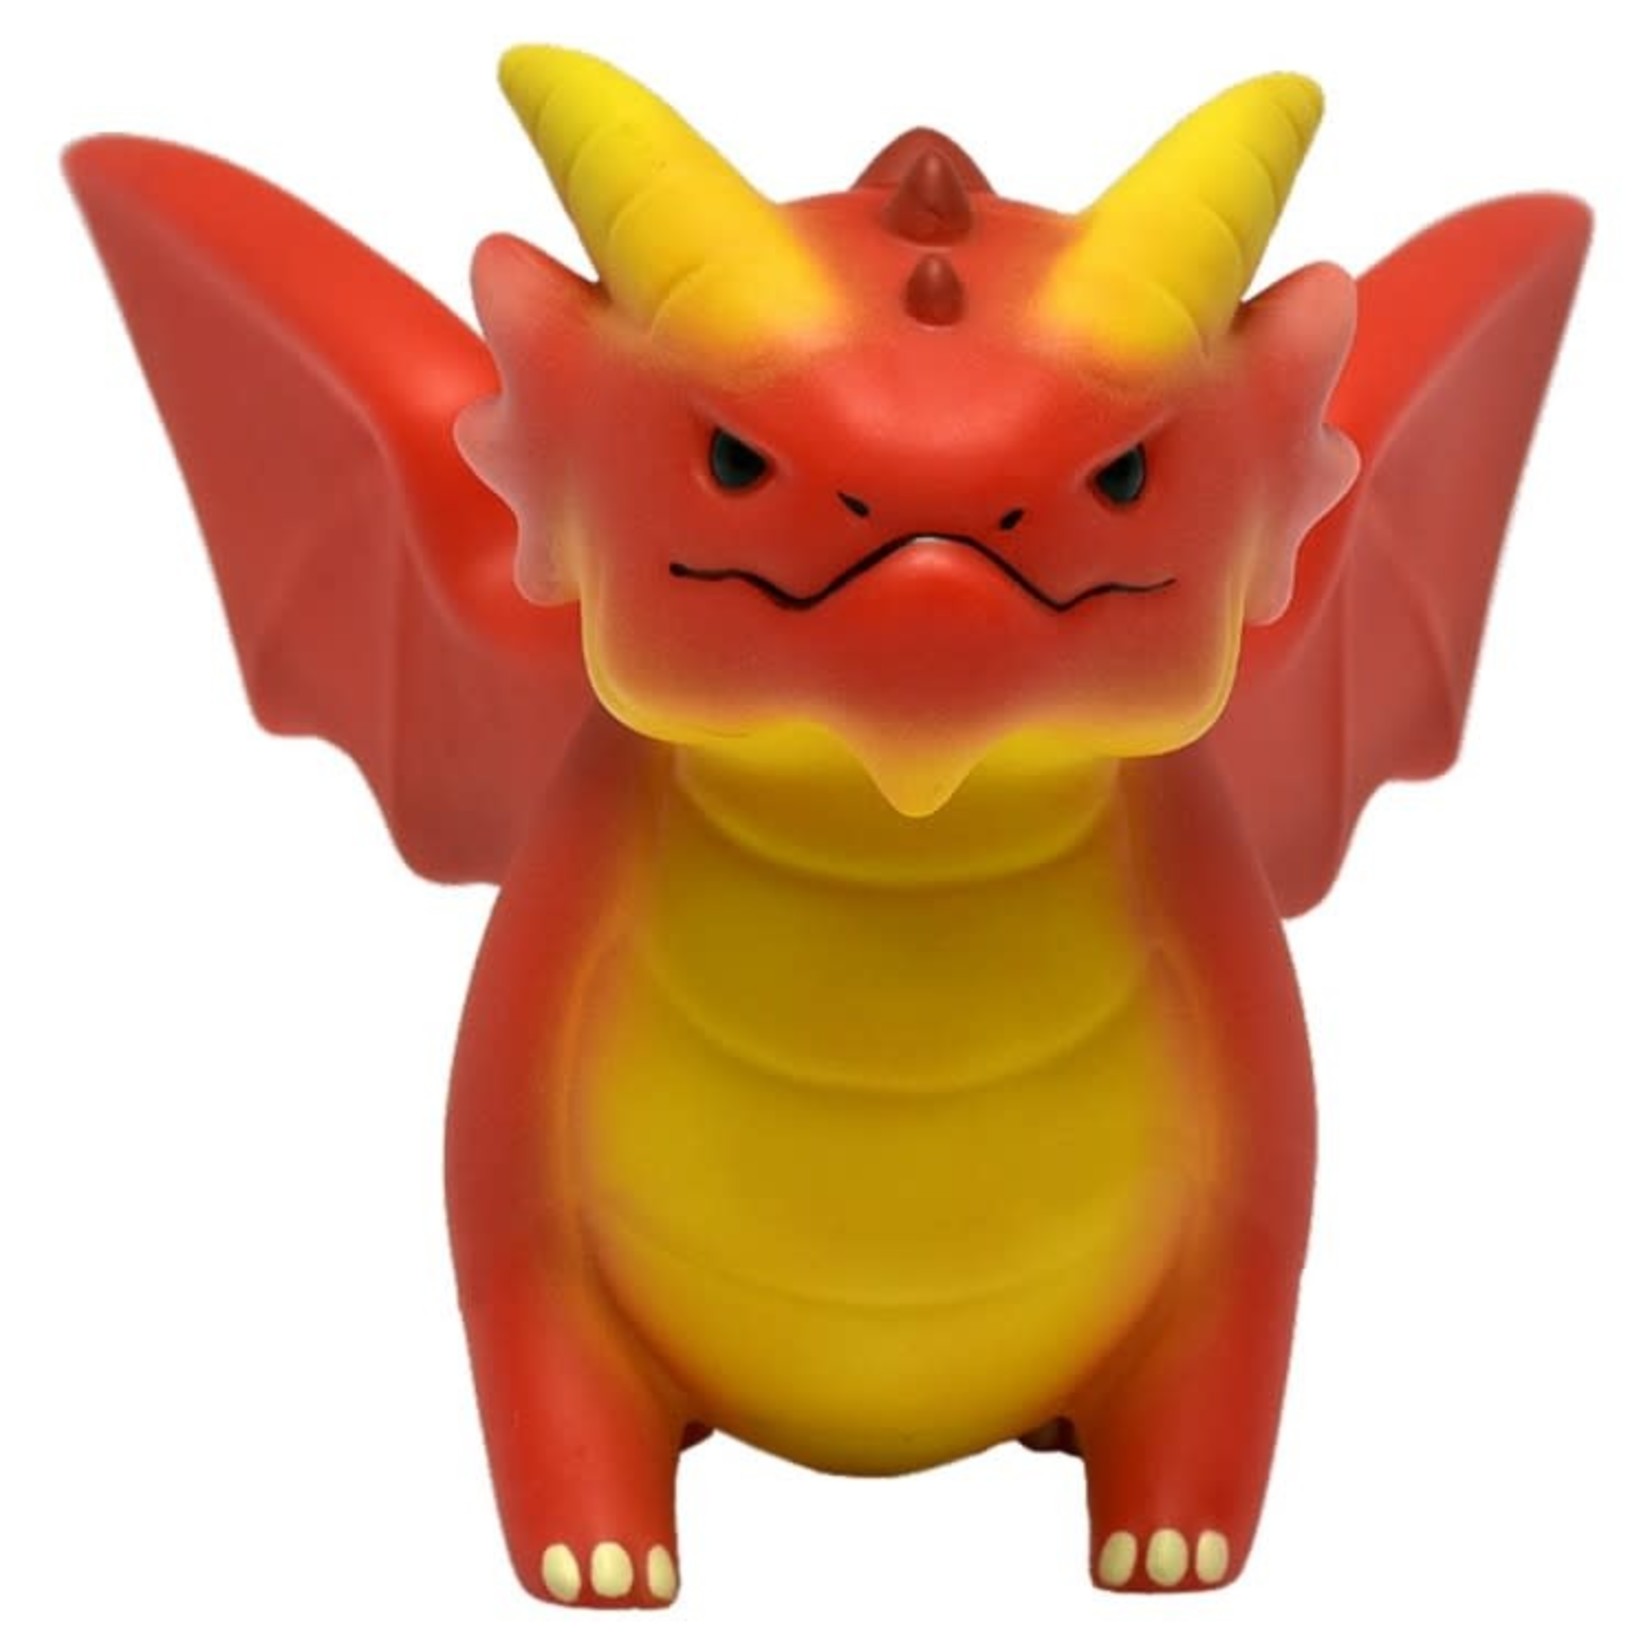 D&D Figurines of Adorable Power - Red Dragon